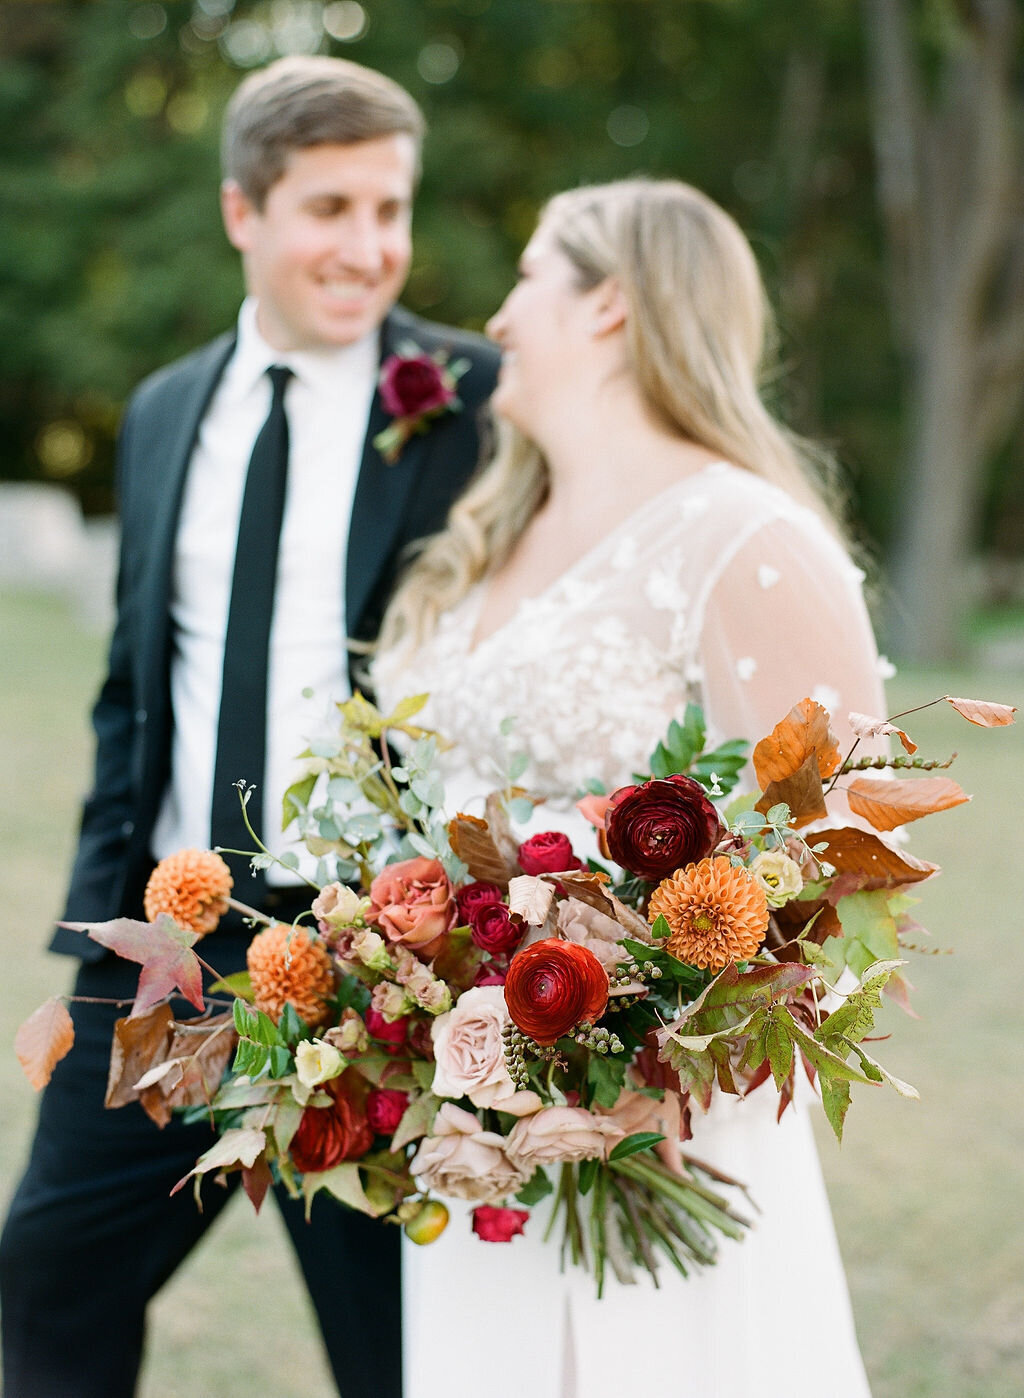 A whimsical bridal bouquet filled with burgundy, terra cotta, dusty rose and burnt orange florals. The bouquet features ranunculus, garden roses, dahlias, fruiting branches and autumn foliage. Designed by Rosemary and Finch in Nashville, TN.